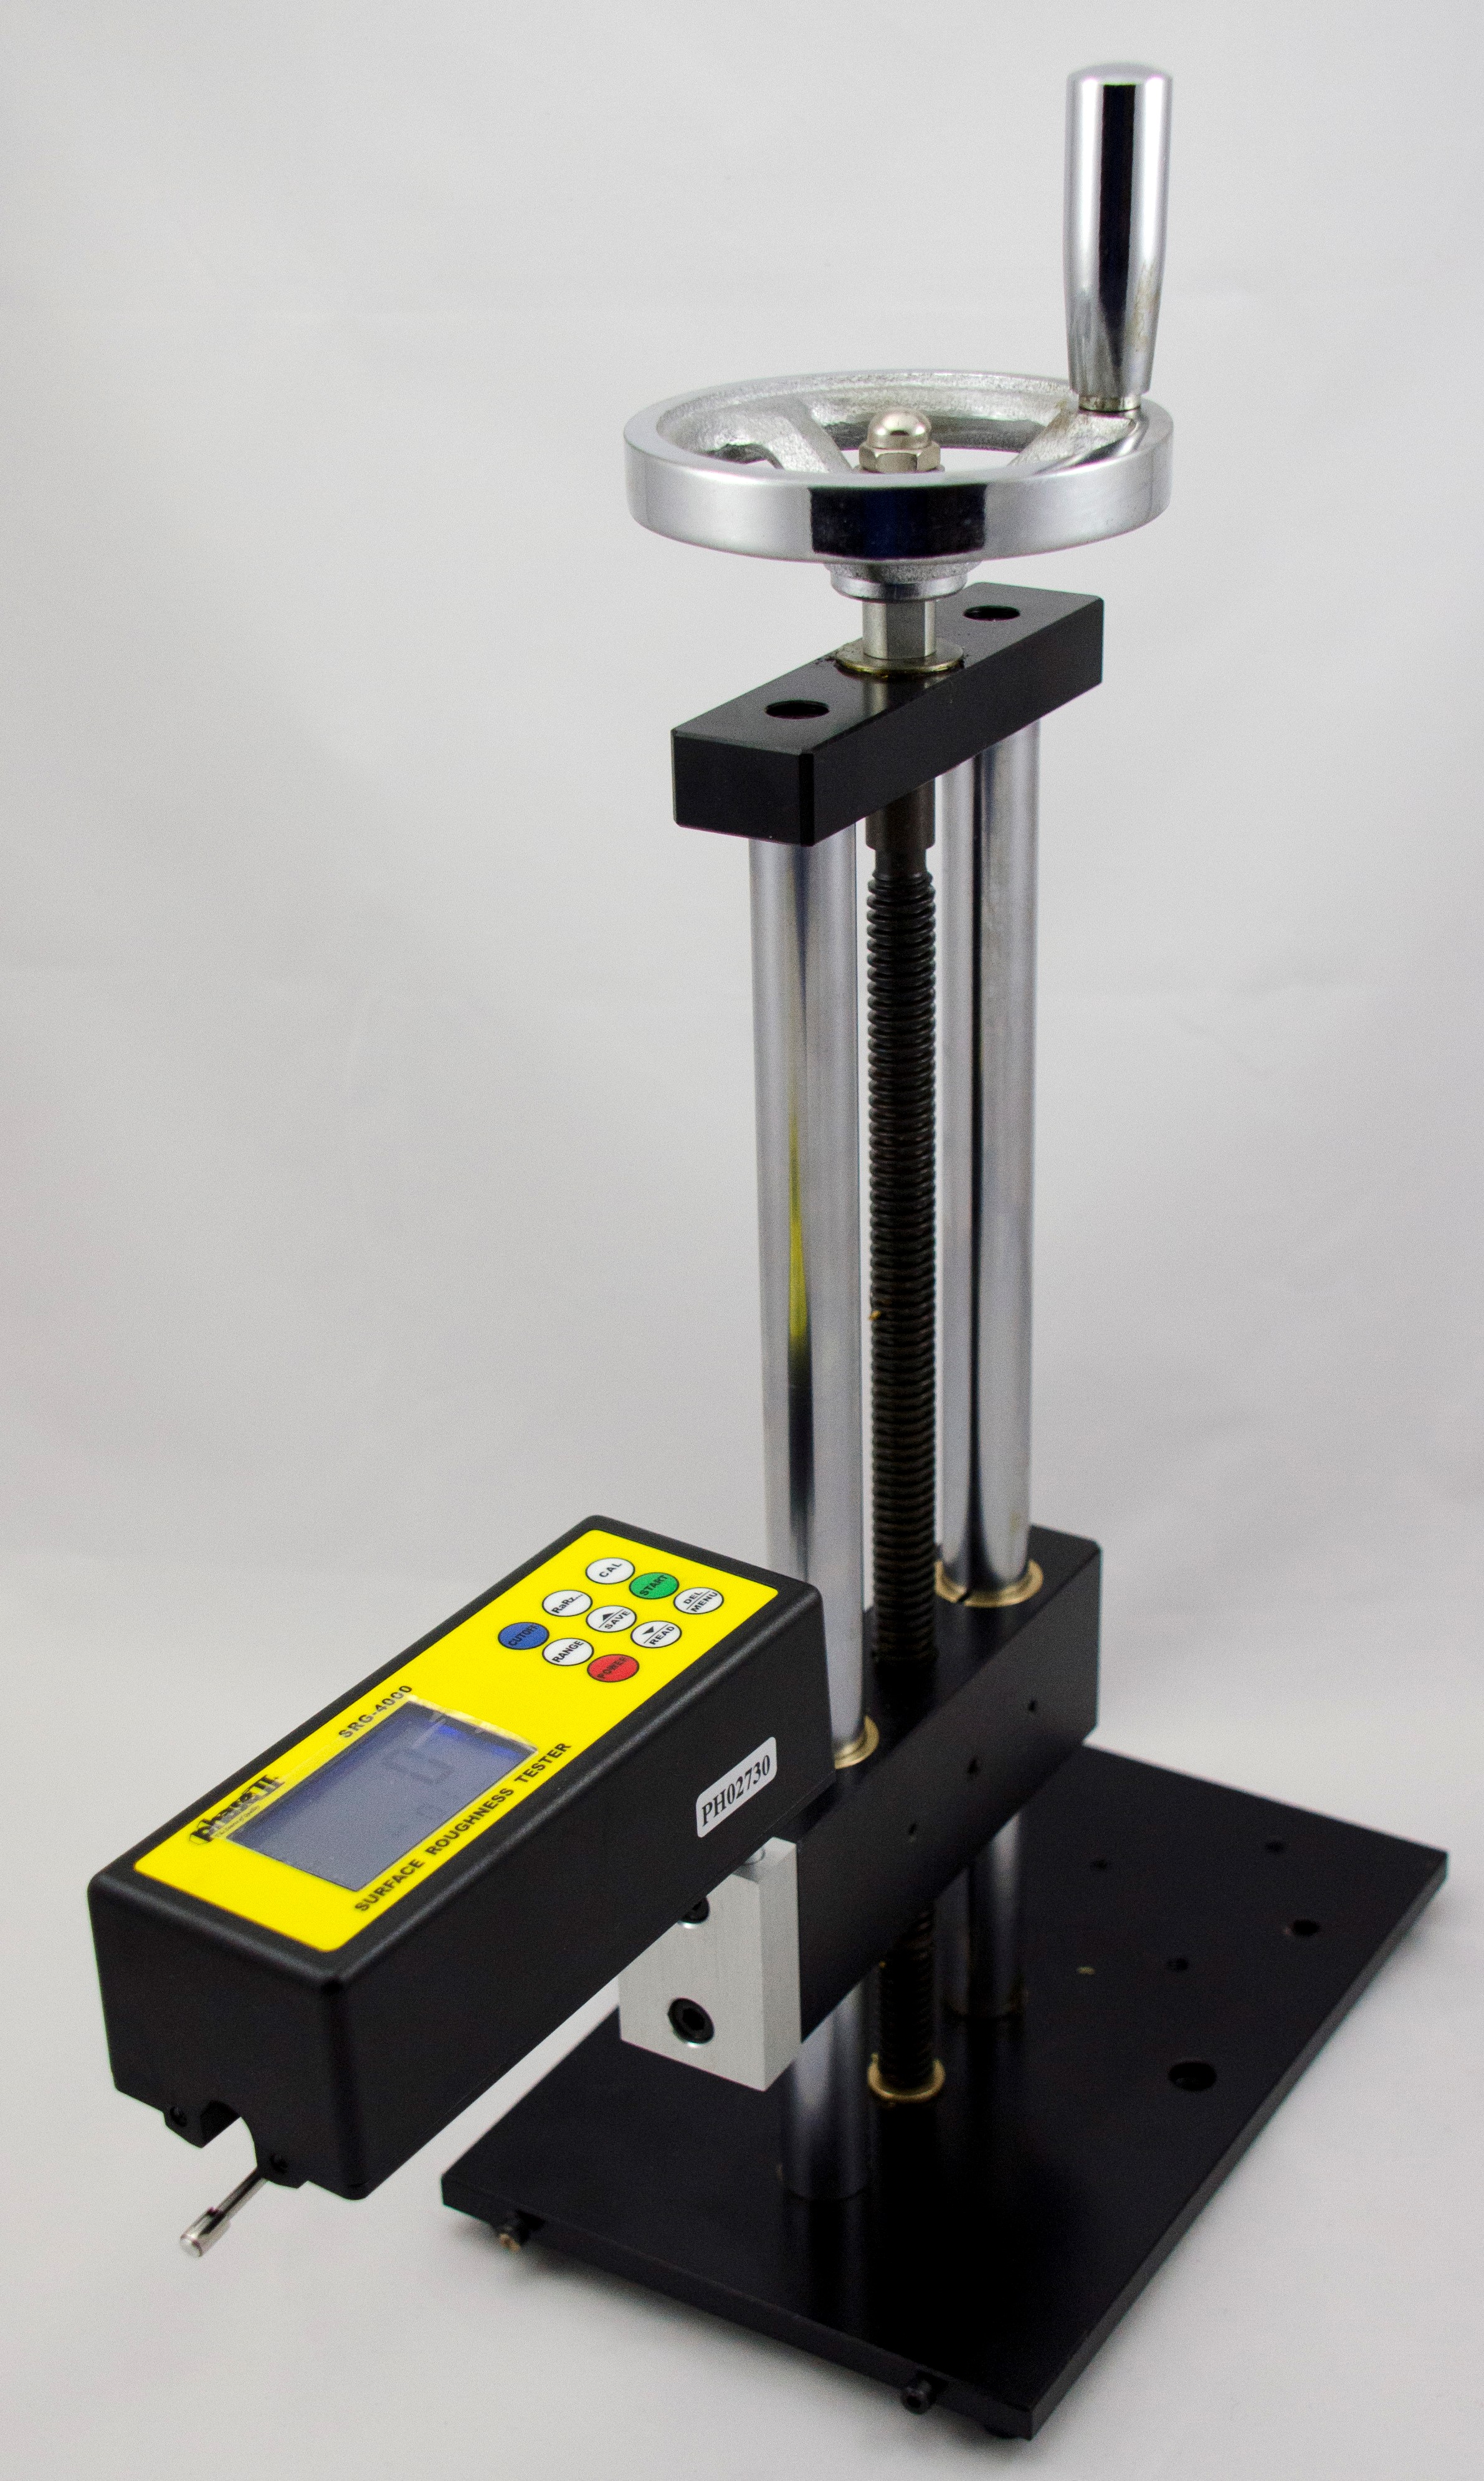 surface roughness tester